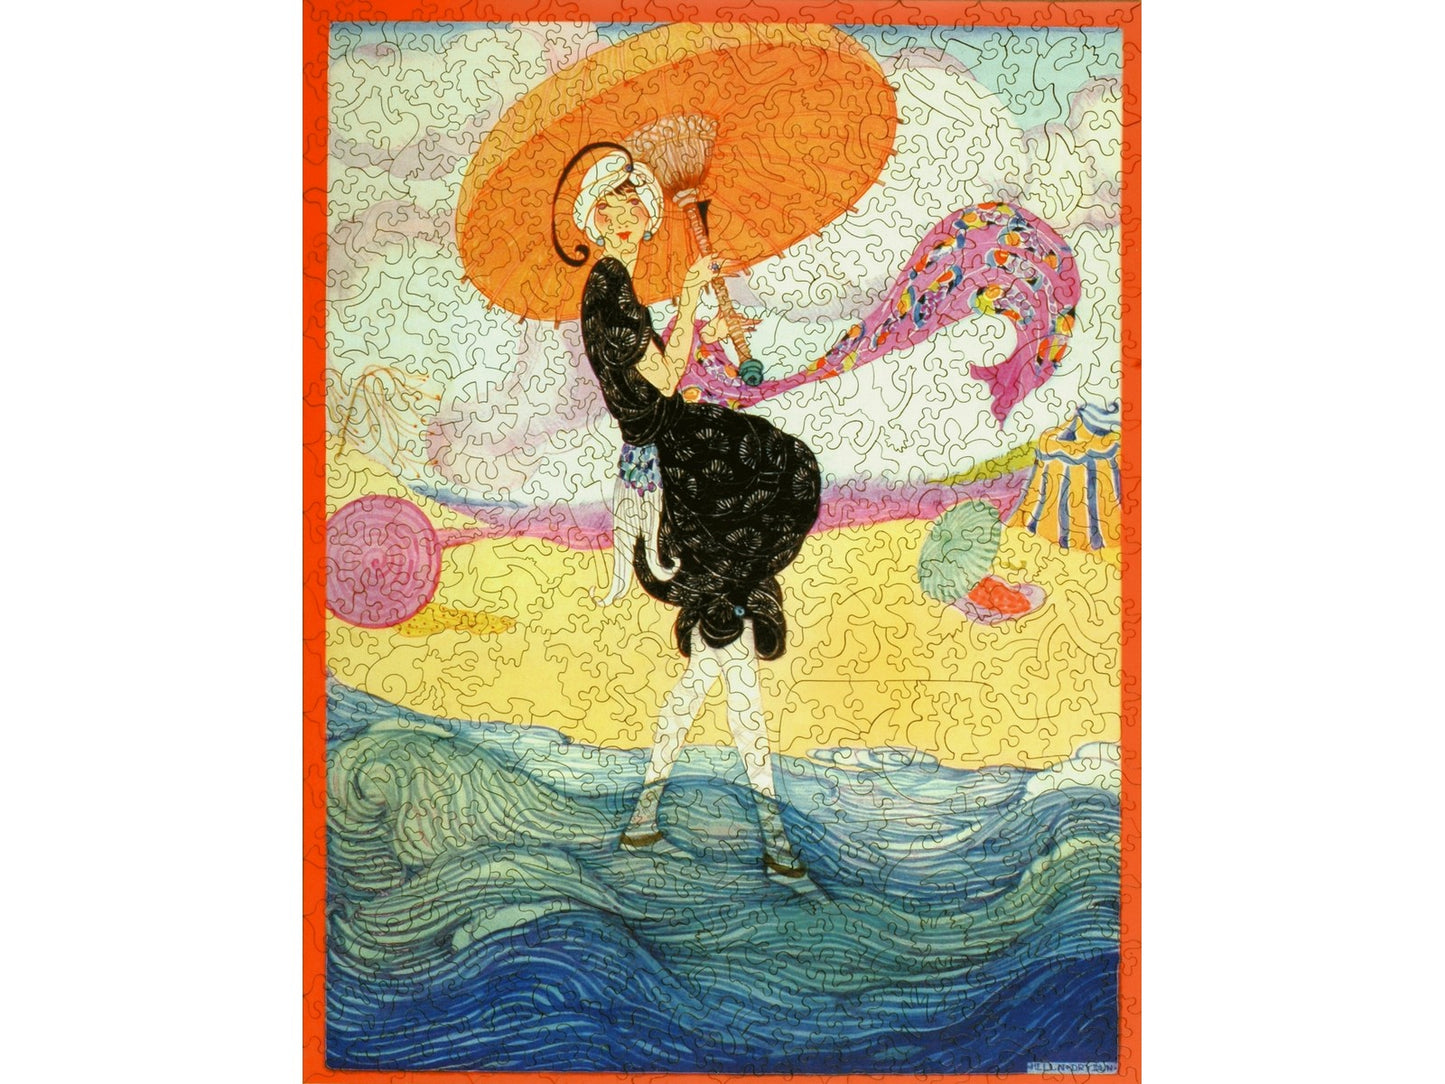  The front of the puzzle, Summer Fashion Number, which shows a woman at the beach holding an orange parasol.